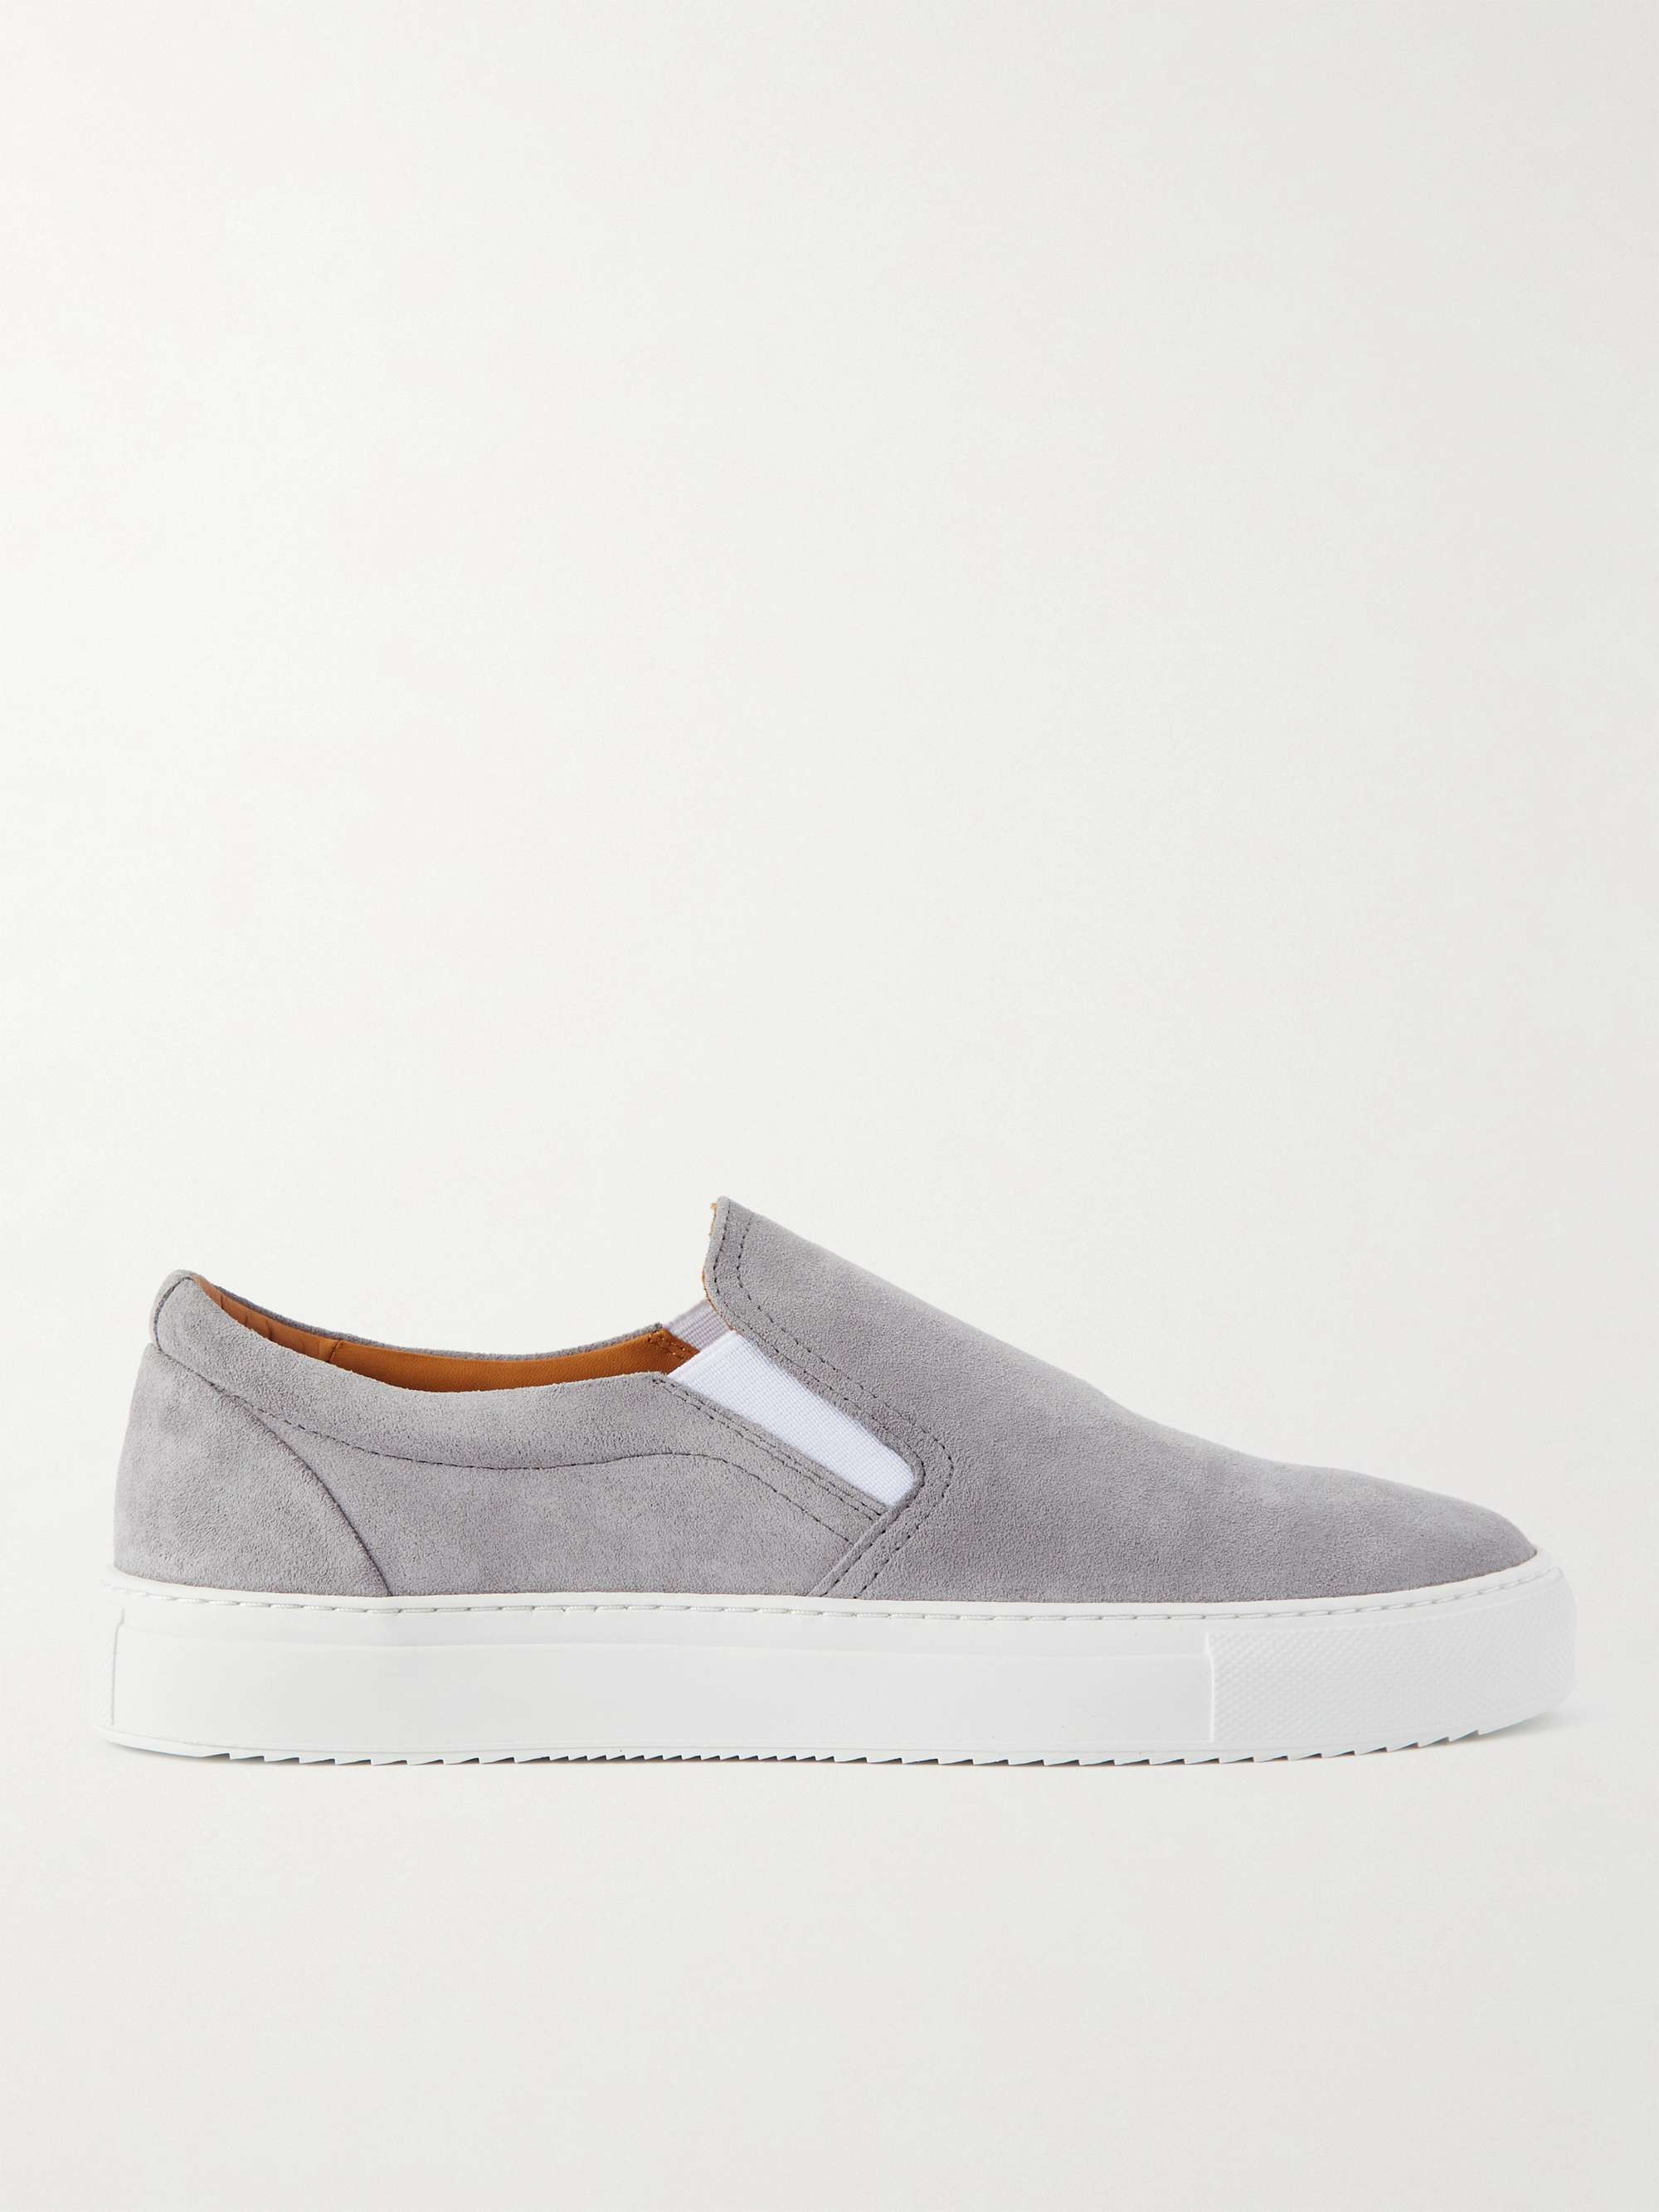 MR P. Regenerated Suede by evolo® Slip-On Sneakers for Men | MR PORTER